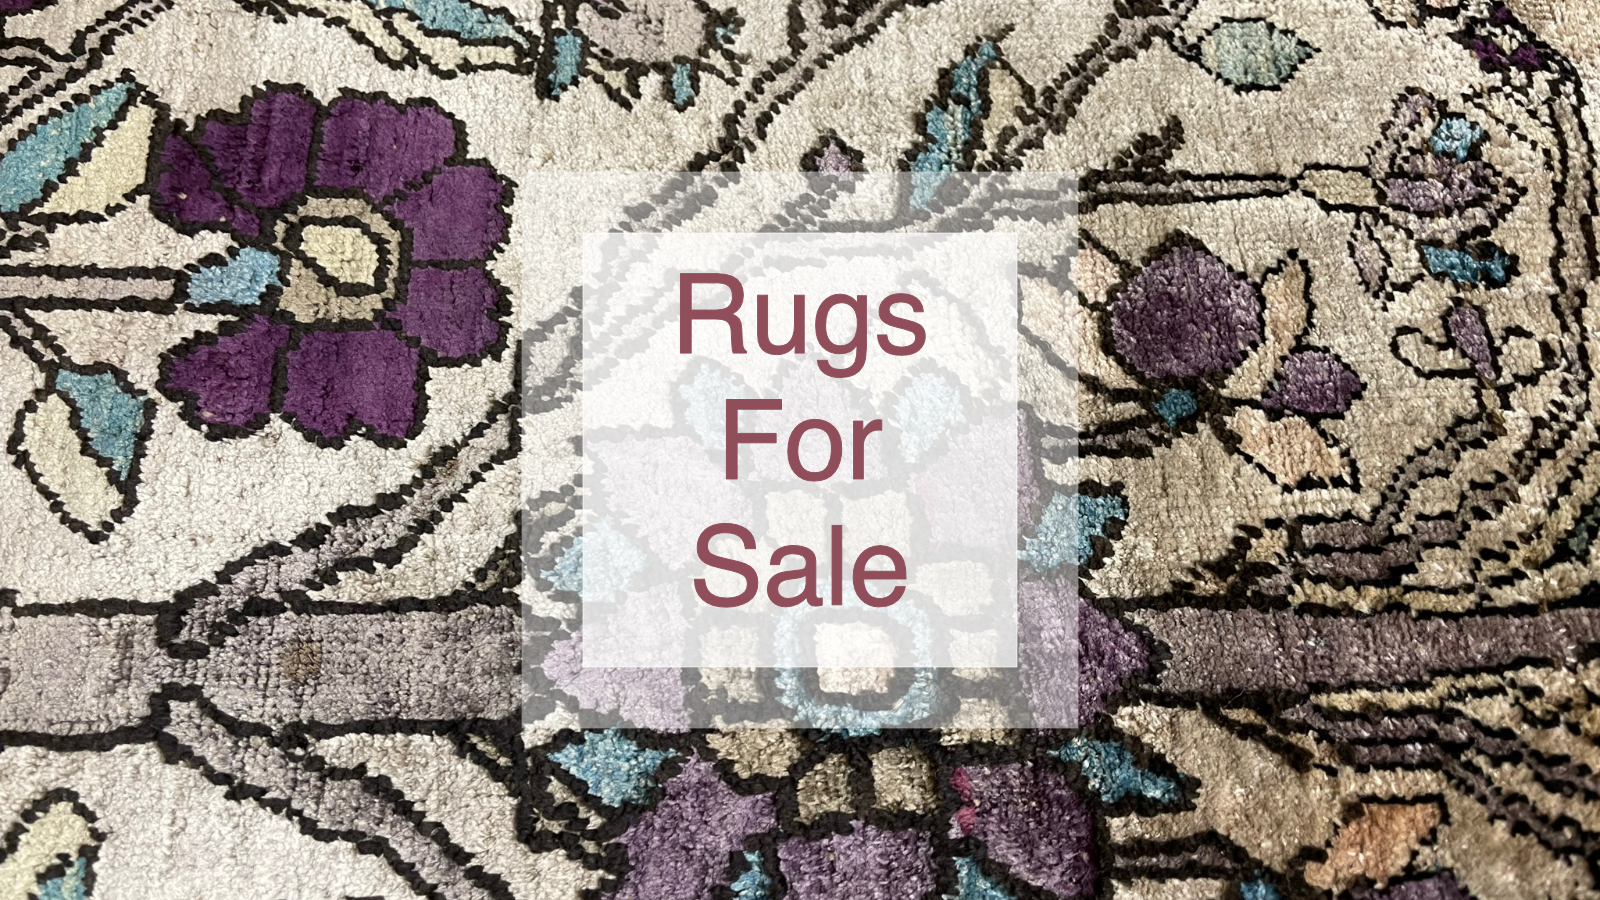 A selection of rugs for sale.